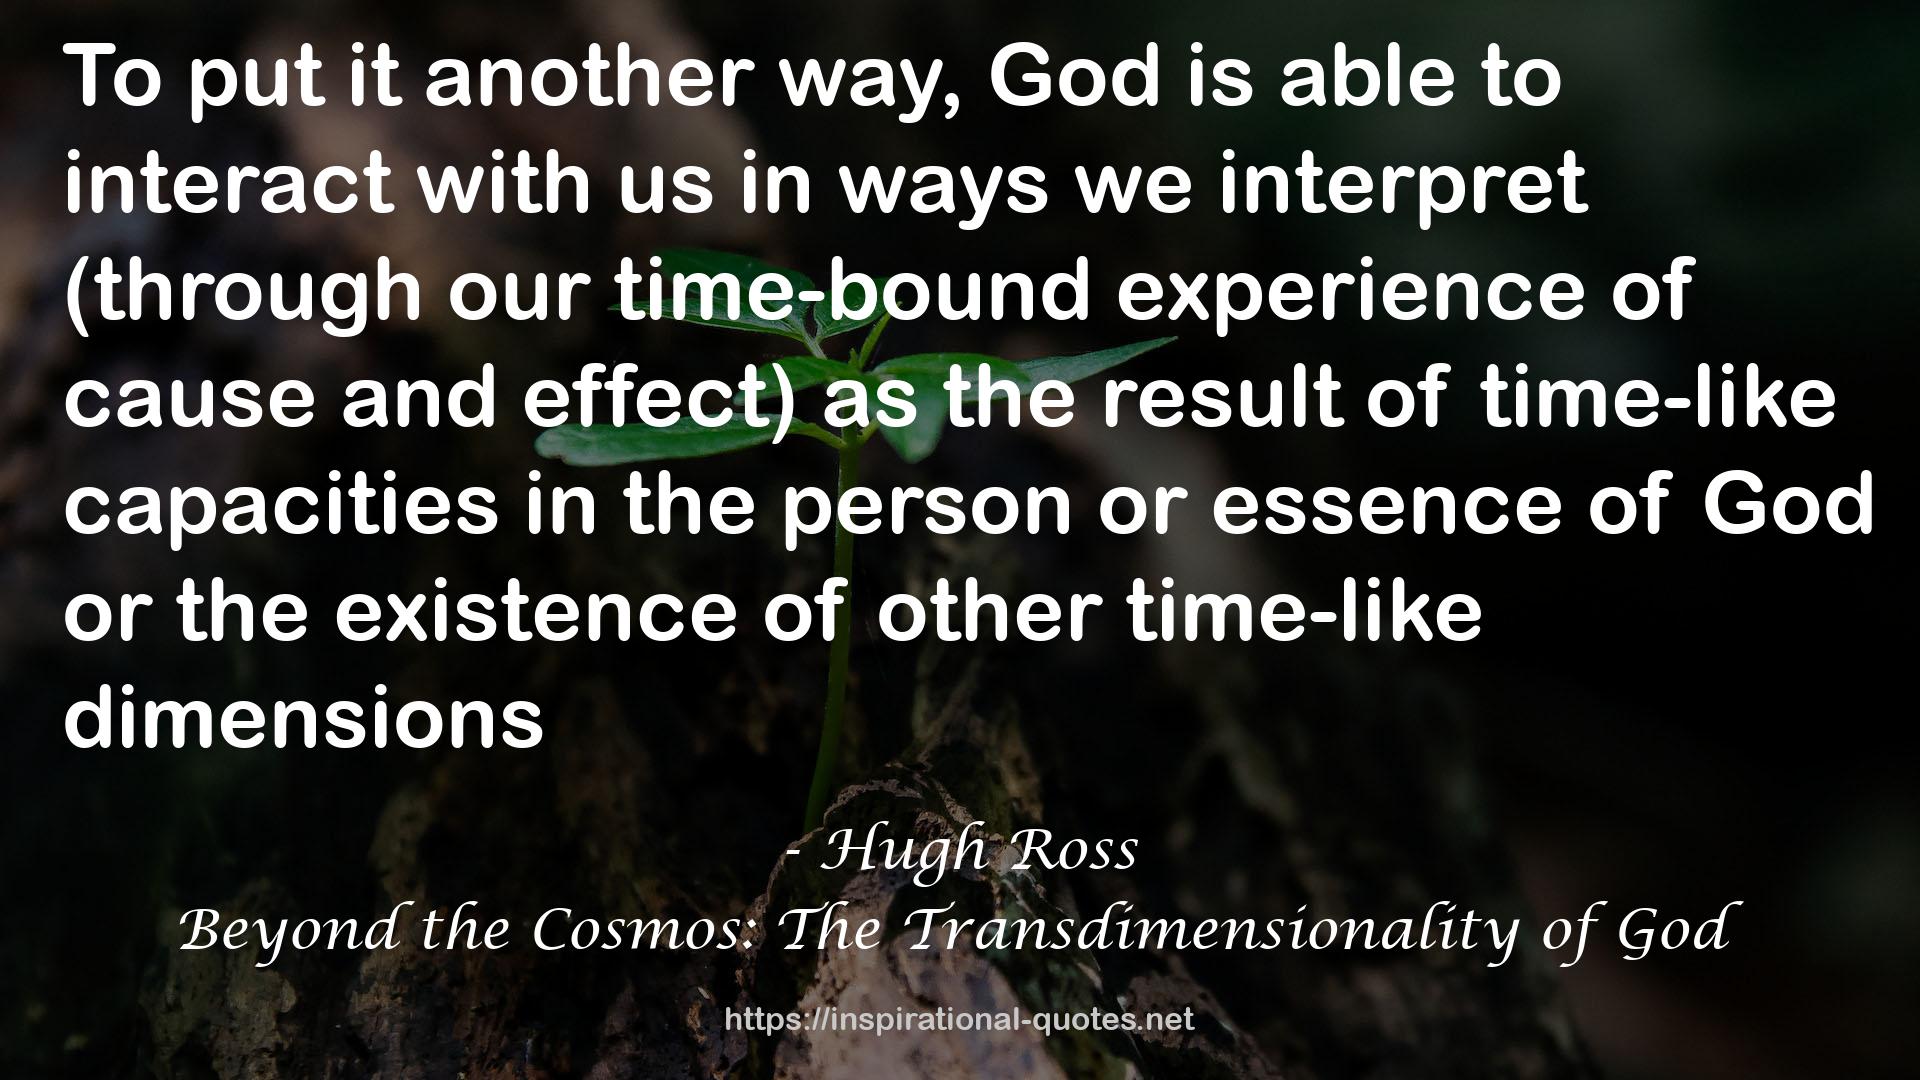 Beyond the Cosmos: The Transdimensionality of God QUOTES